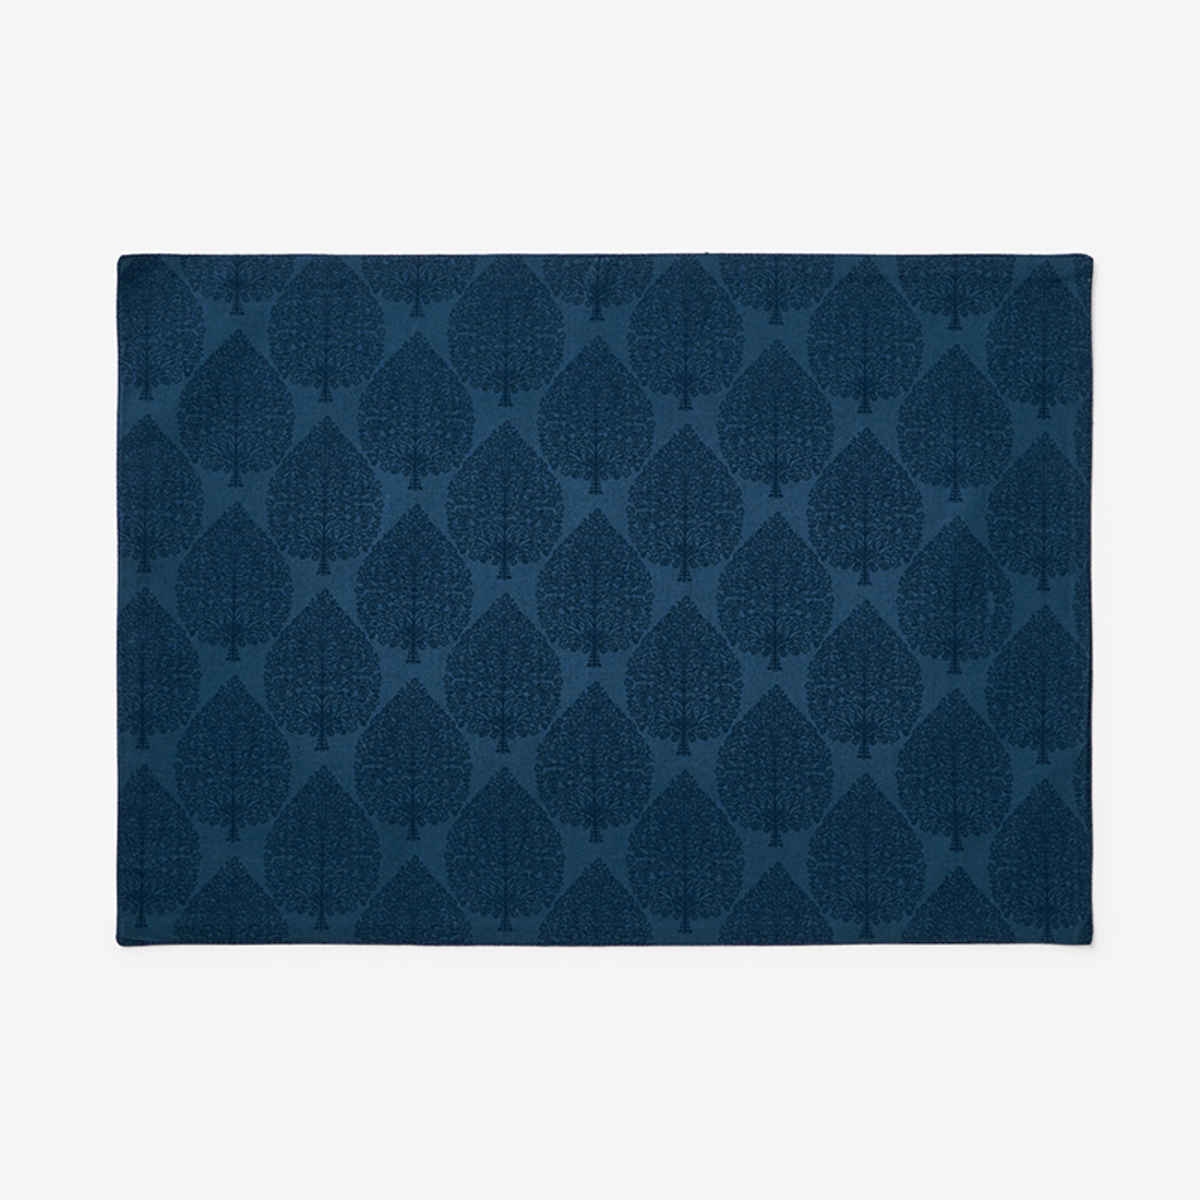 https://companystore-res.cloudinary.com/image/upload/f_auto,q_40,dpr_3.0/w_400,c_scale/webimages/80025c_trees_placemats_blue_main?_s=RAABAB0